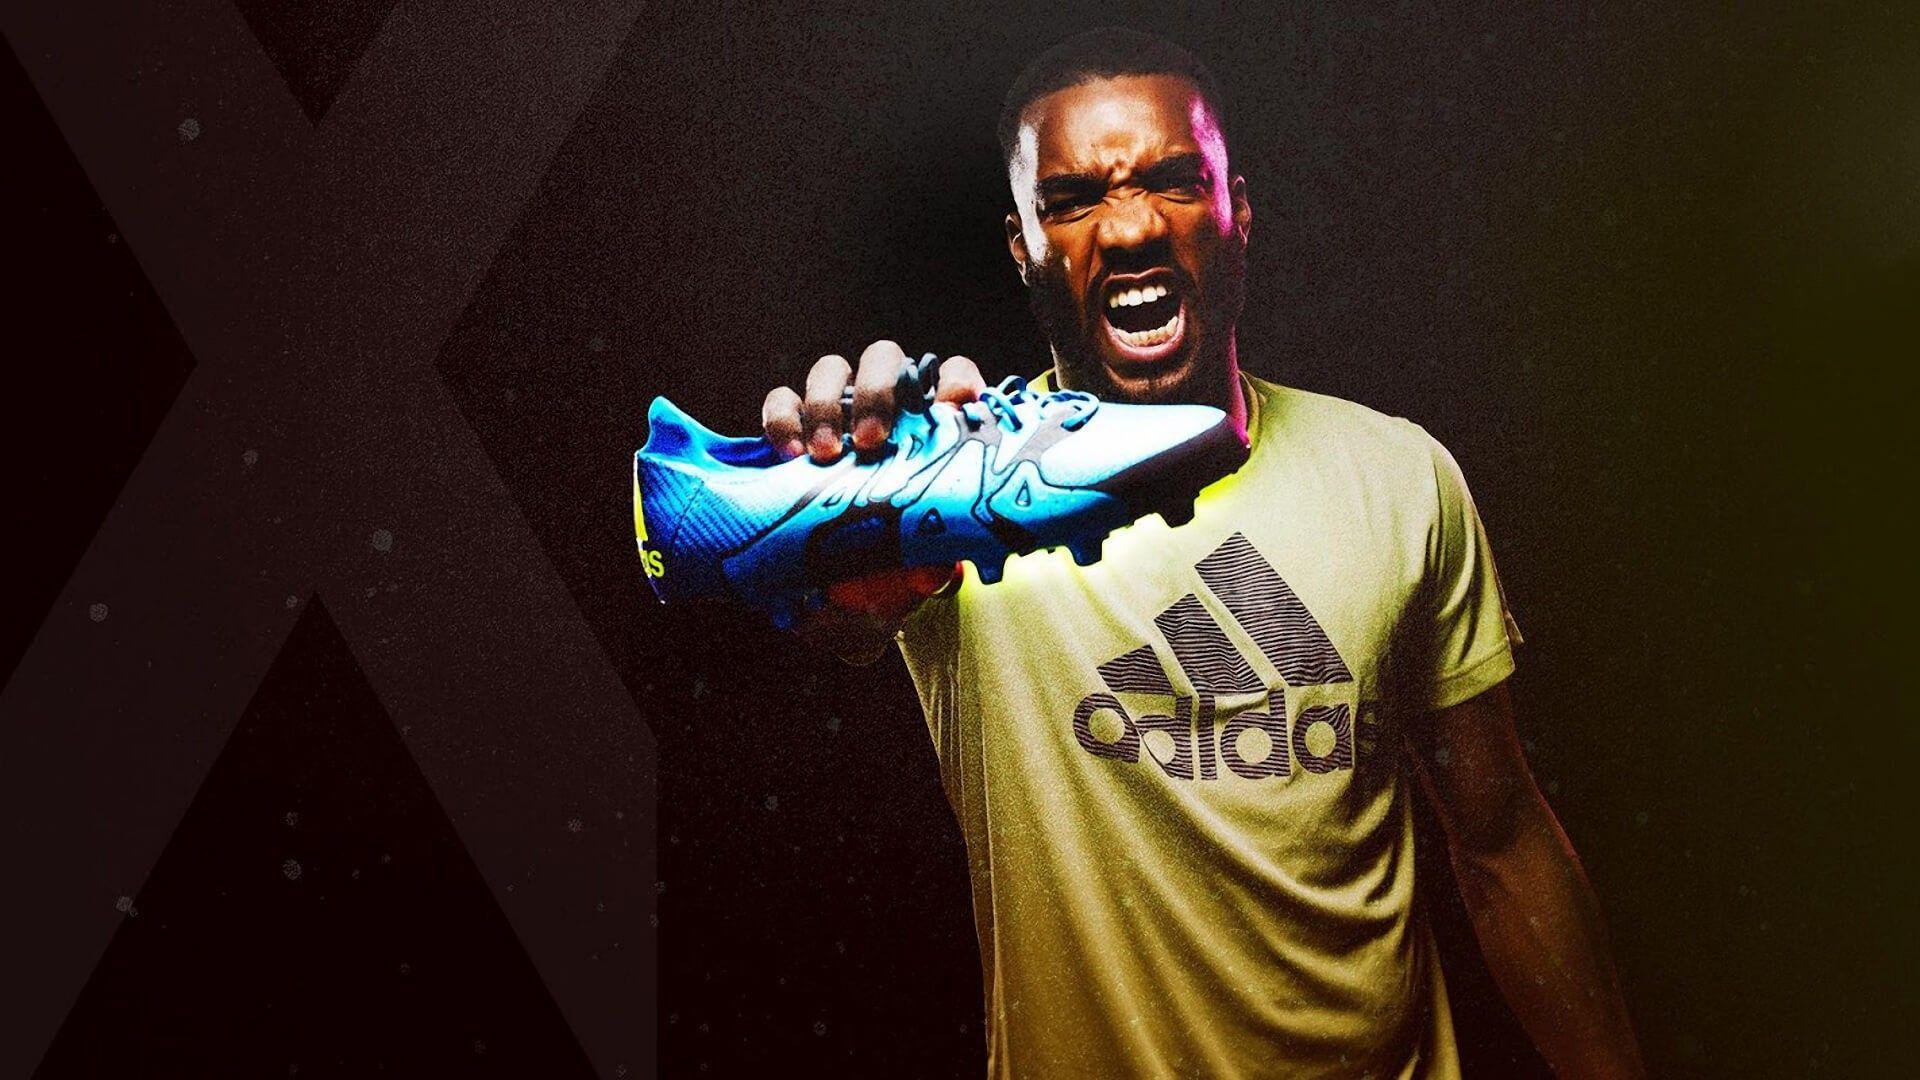 Download 1920x1080 Adidas X 2015 2016 Football Boots Glorious